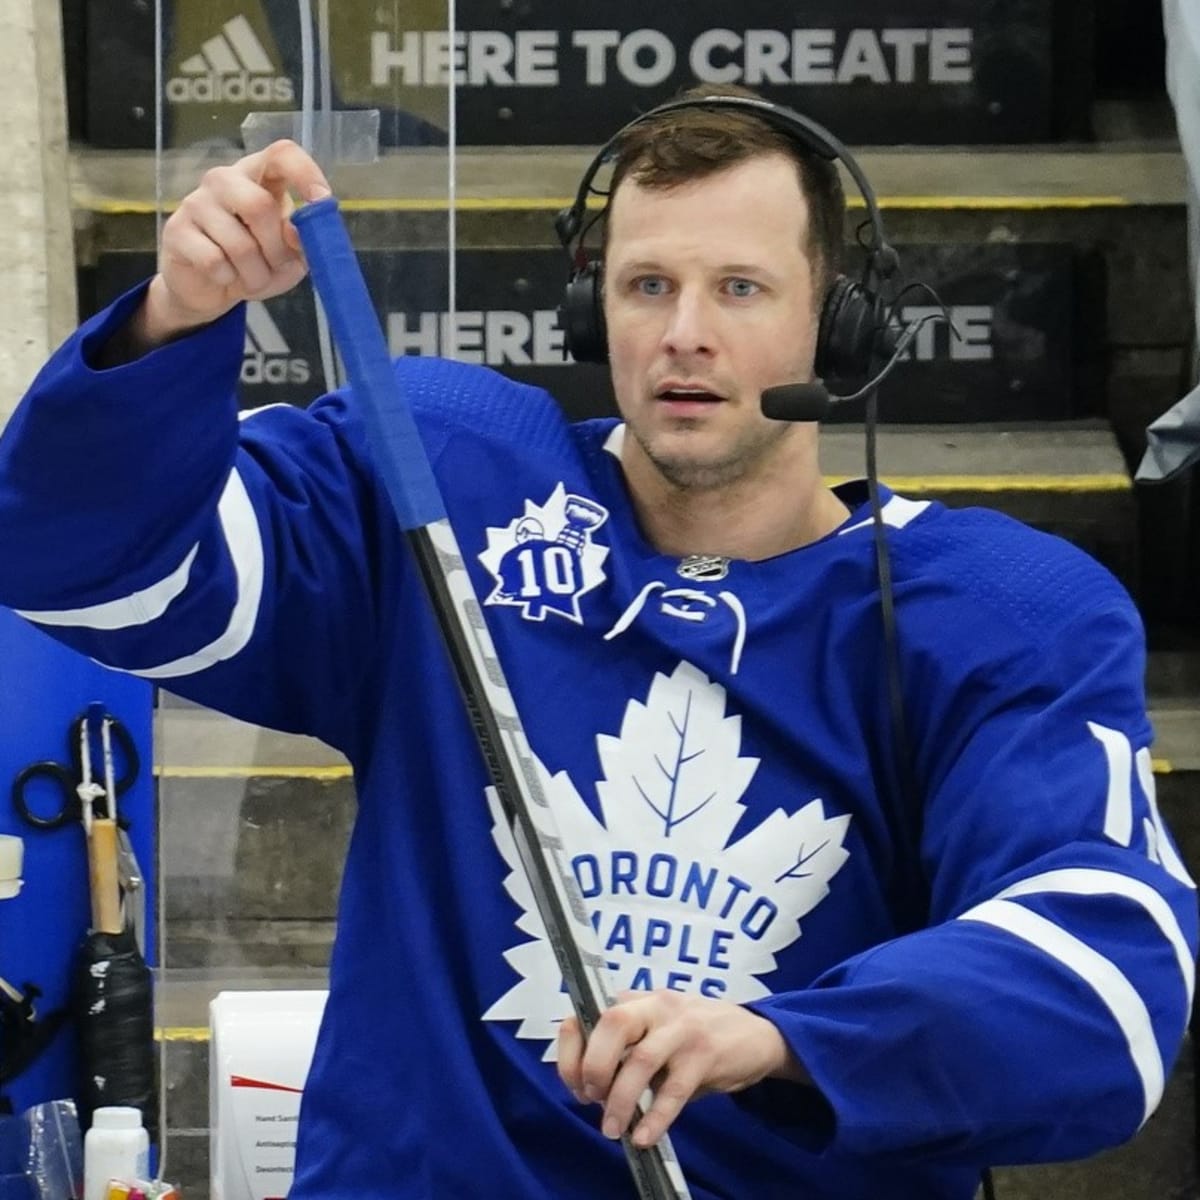 The Spezza kids are keeping dad - Toronto Maple Leafs